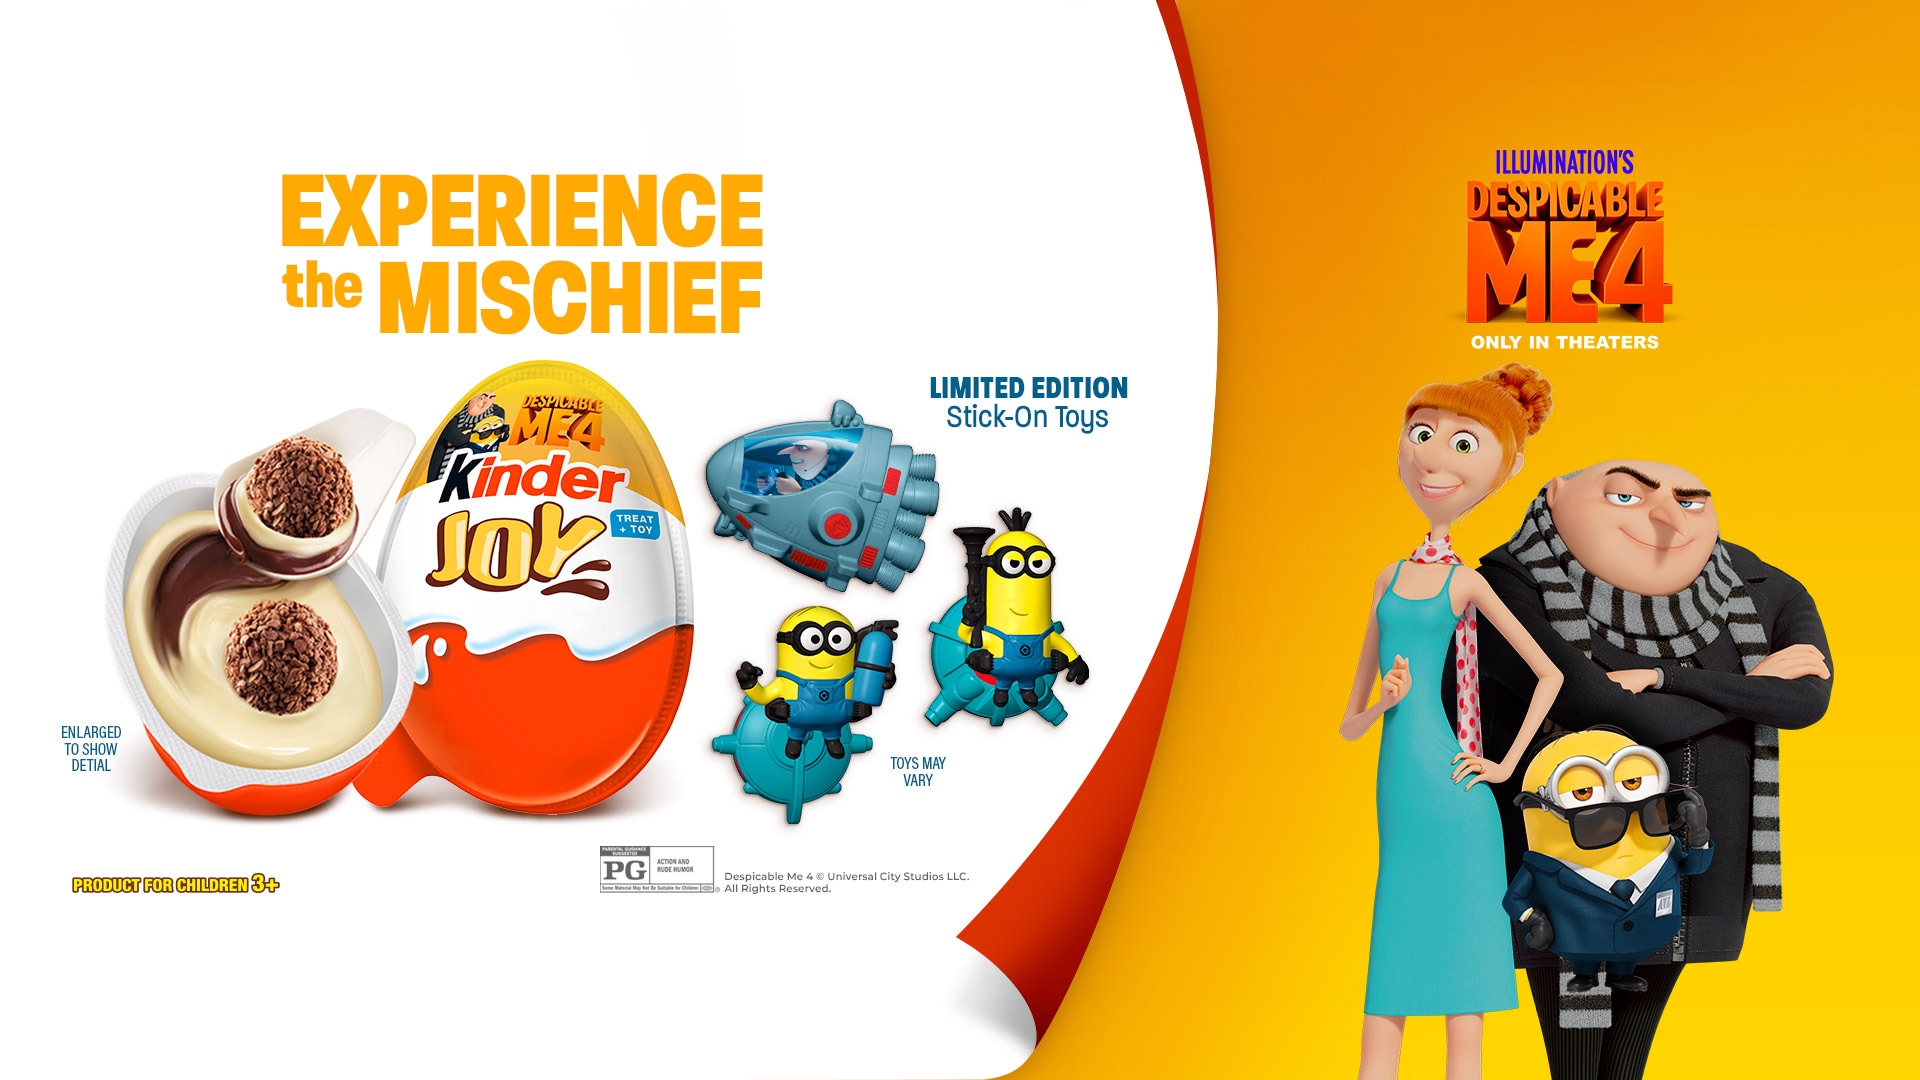 Limited Edition Despicable Me 4 Toys